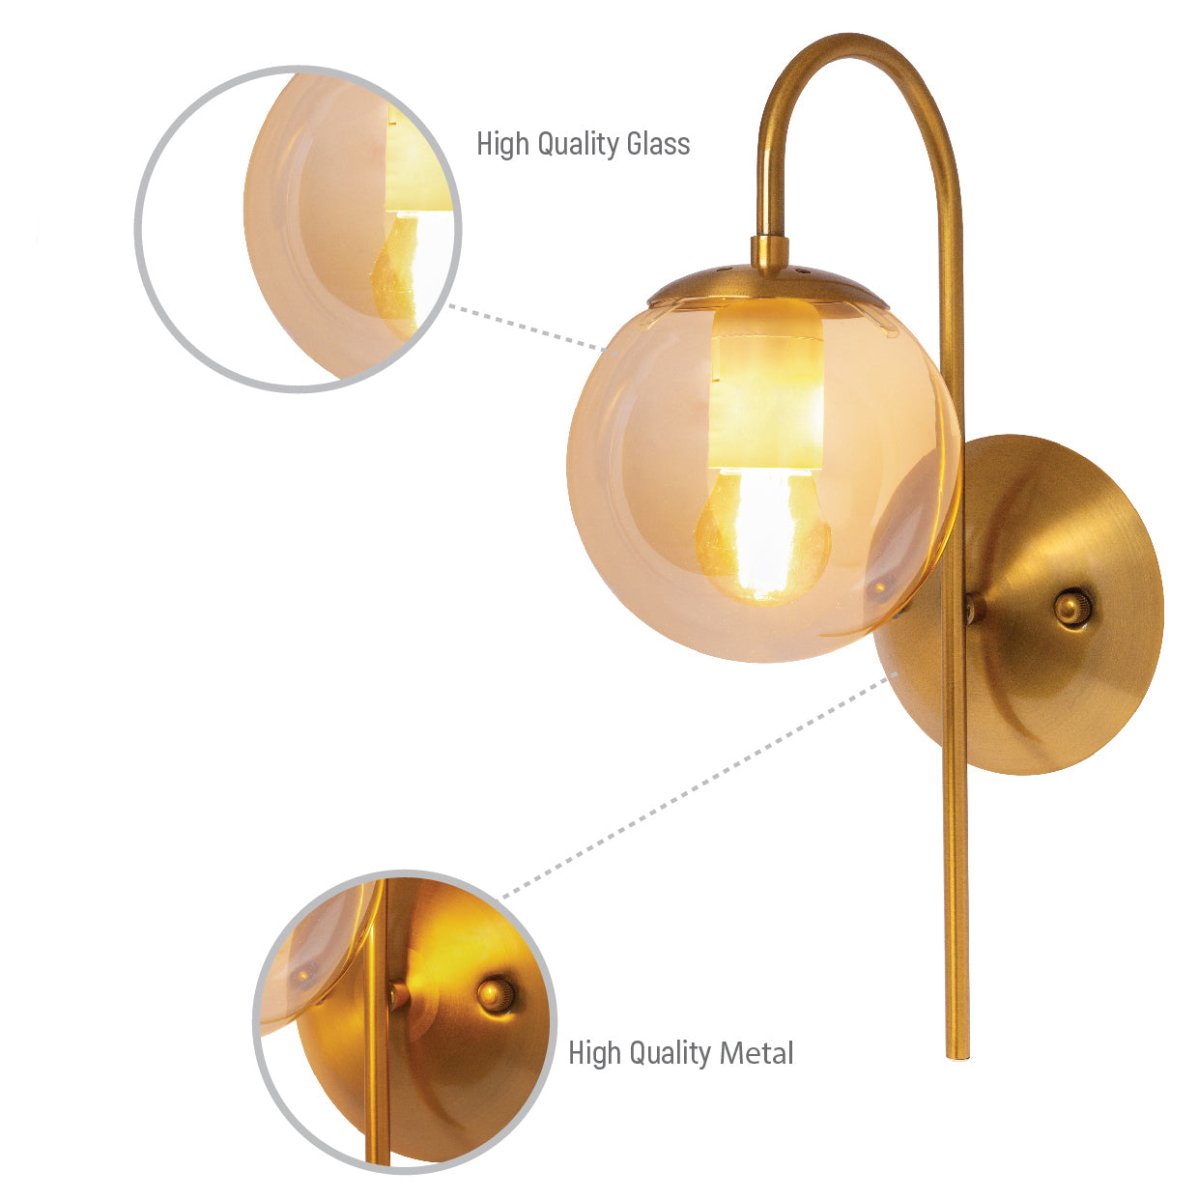 Close up shots of Amber Globe Glass Gold Aluminium Bronze Cane Metal Downward Wall Light with E27 Fitting | TEKLED 151-19488